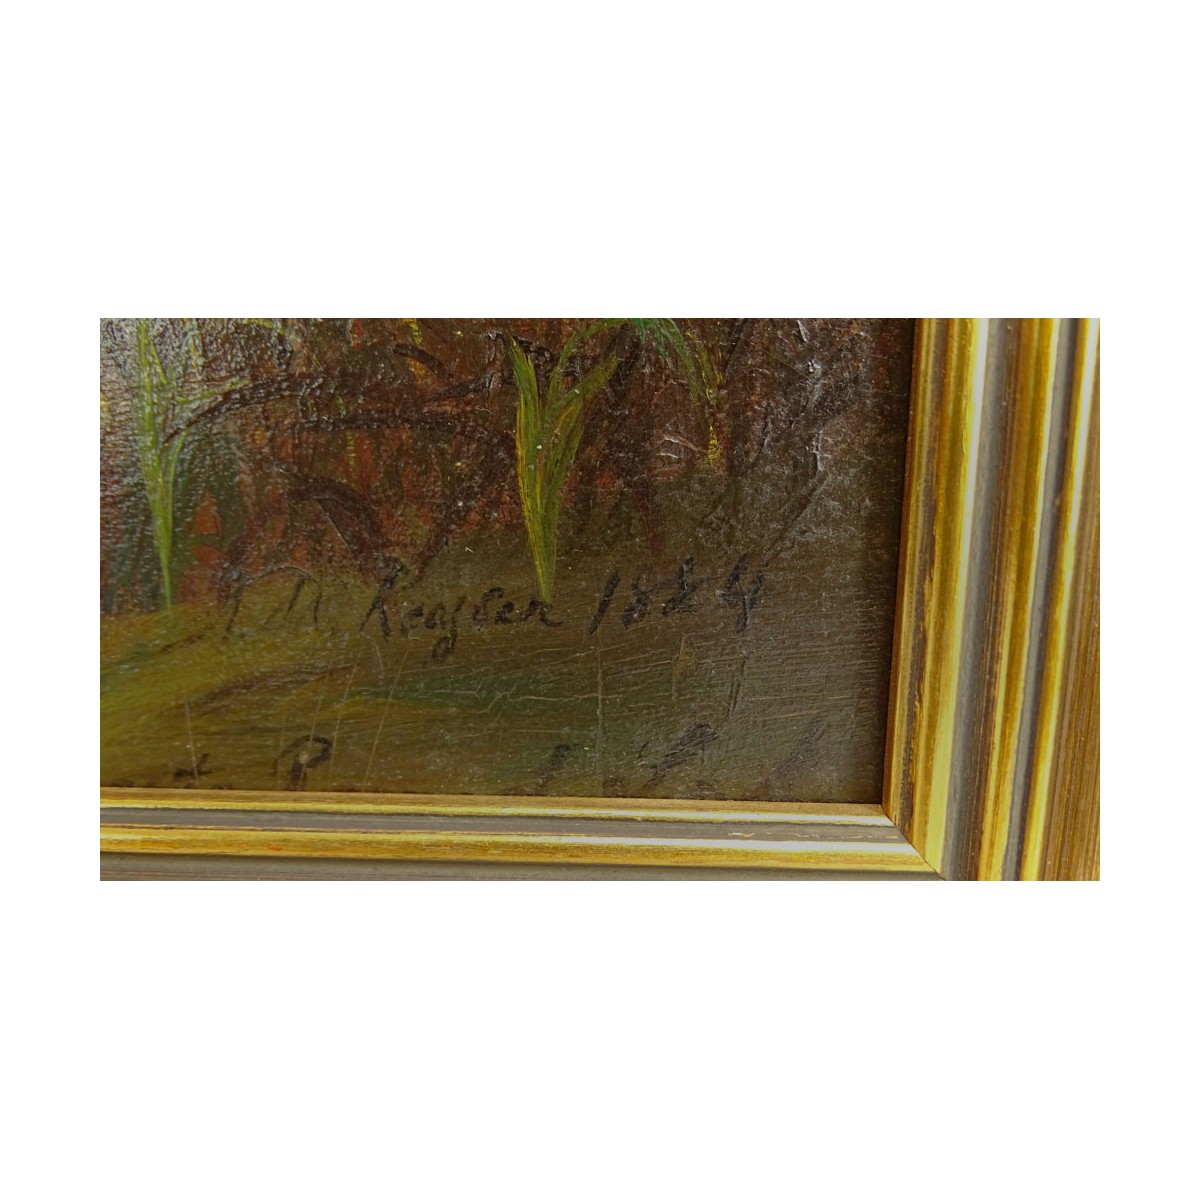 19th Century Oil on Masonite "River House" Signed, titled (Possibly in Span